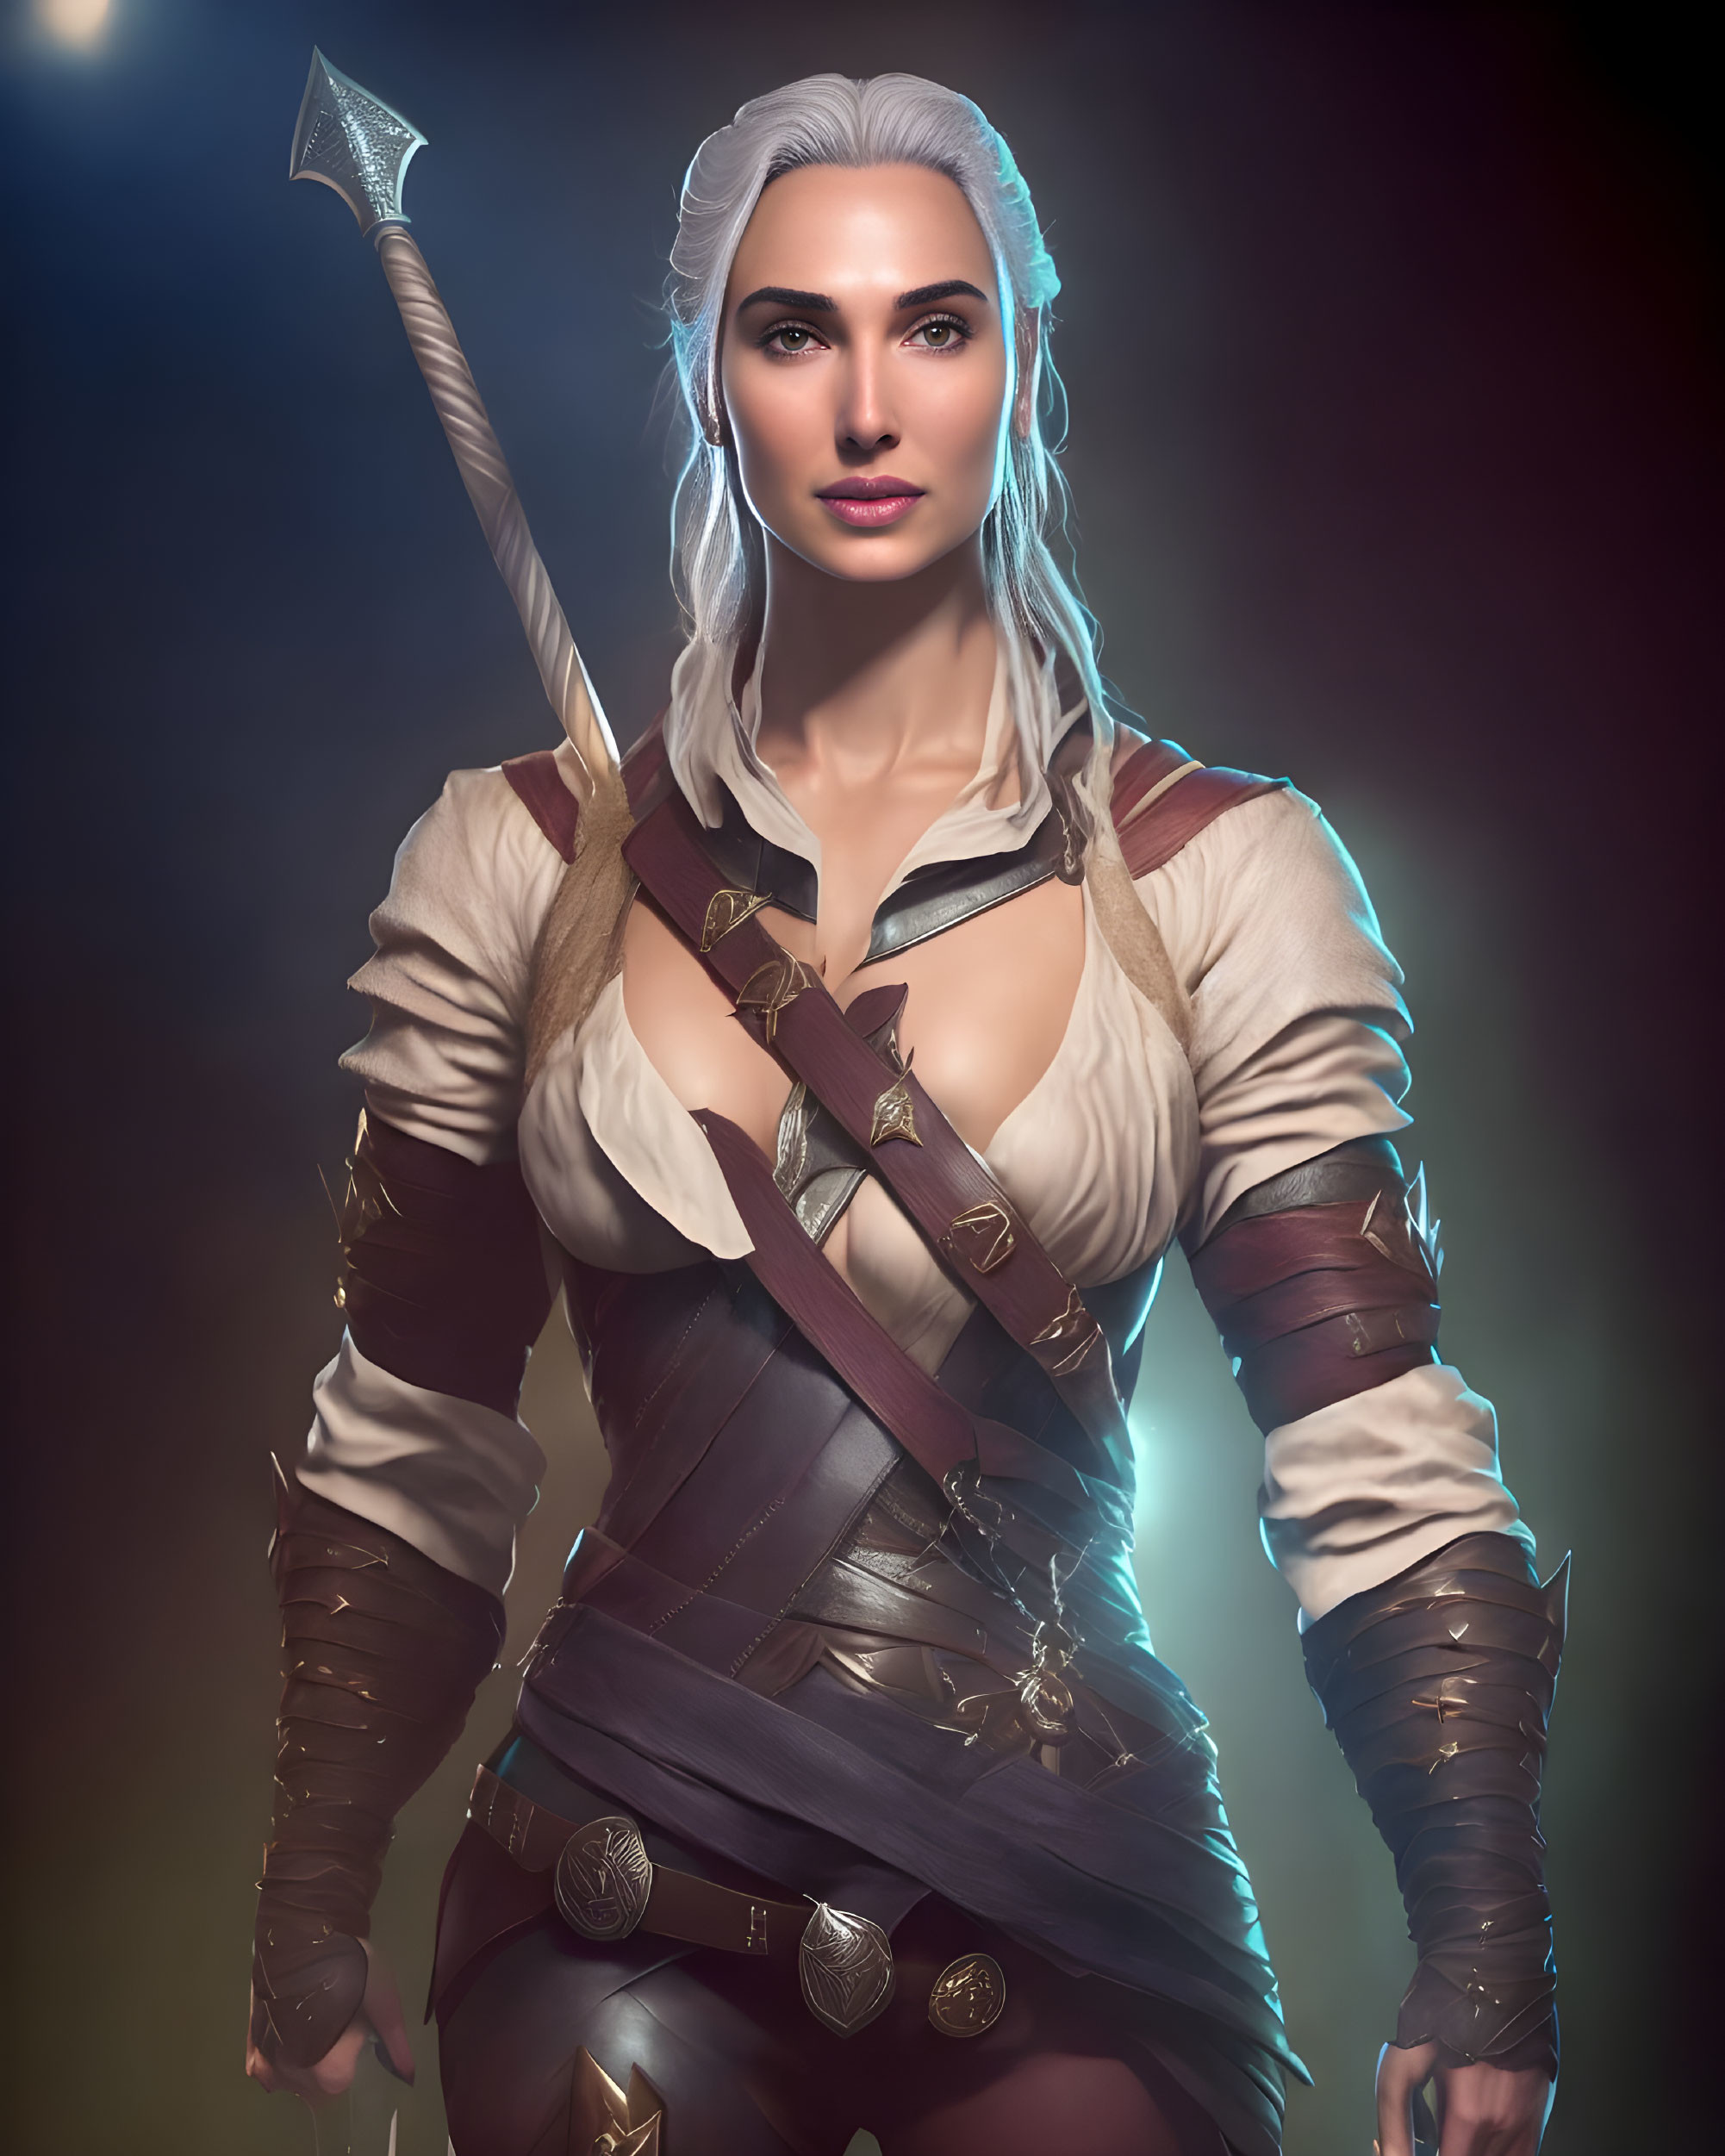 Fantasy female warrior digital portrait with white hair and spear in medieval attire